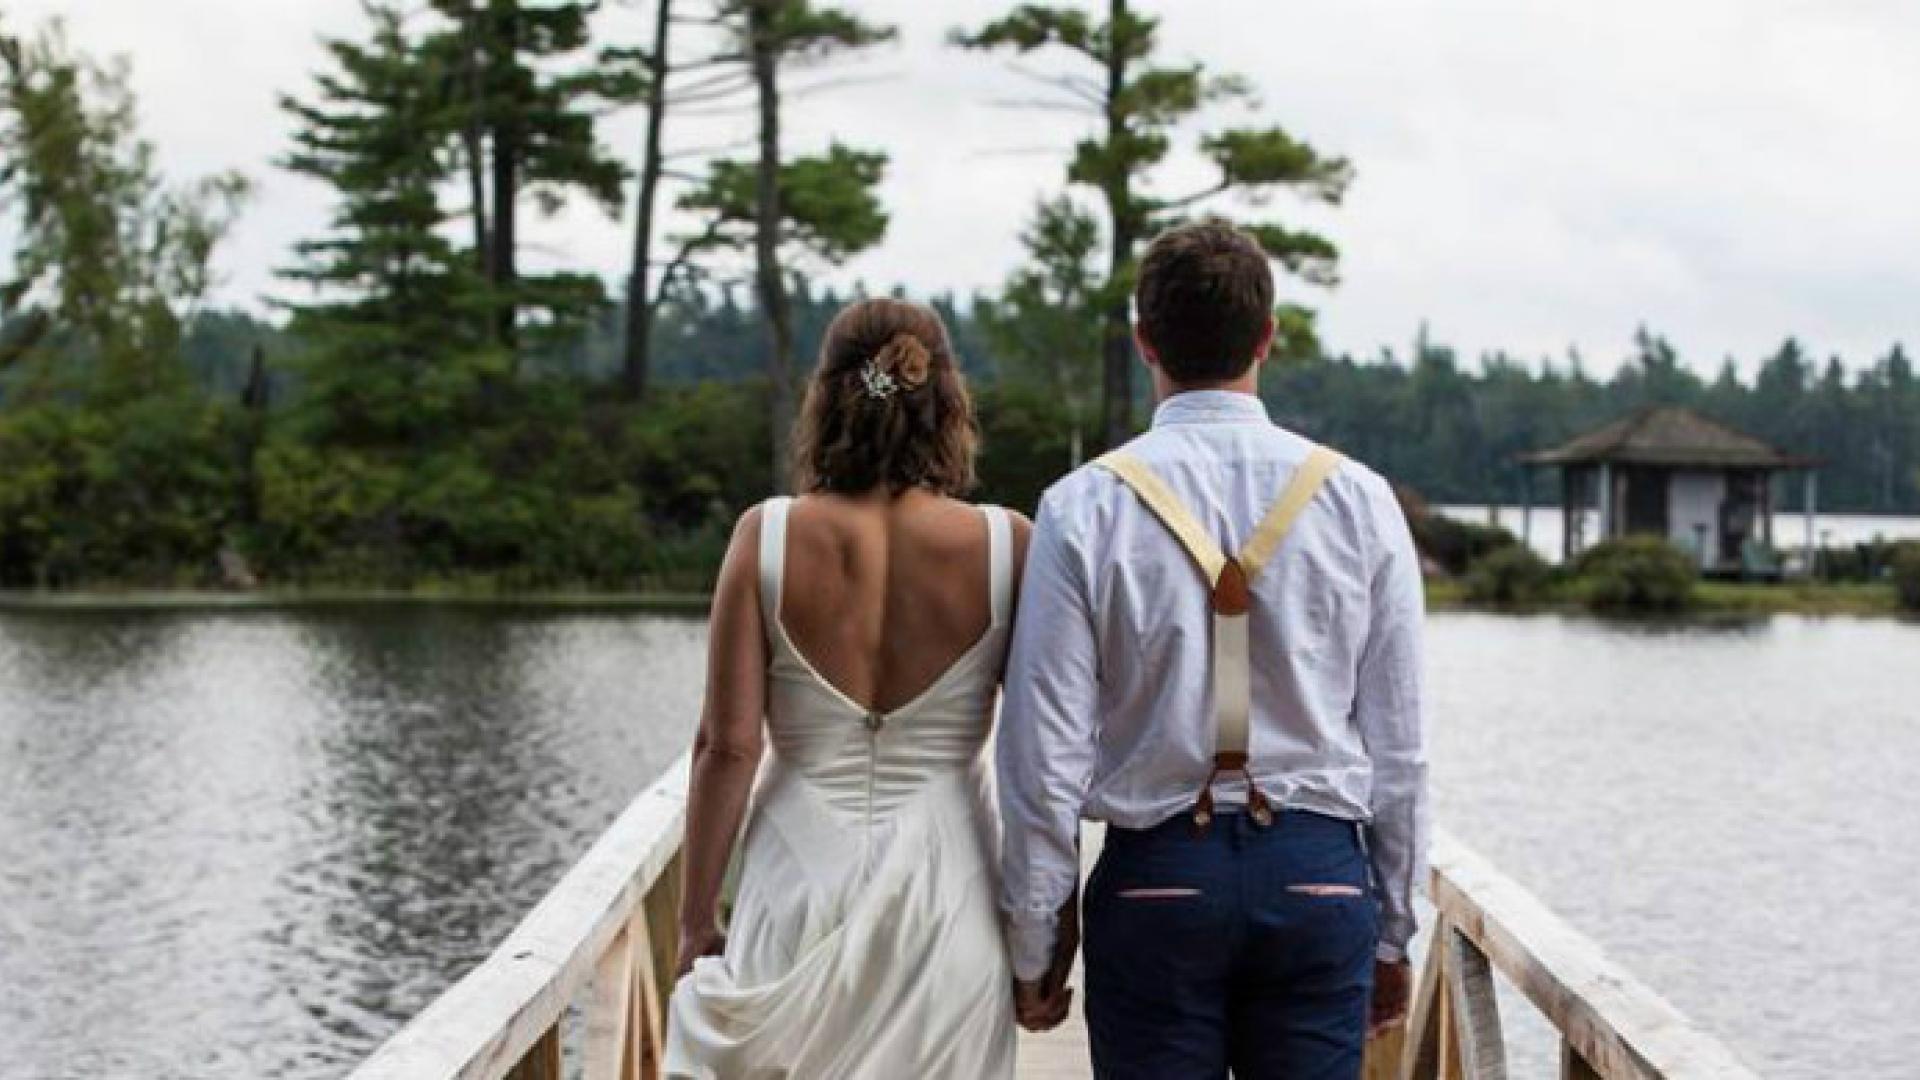 5 Quirky Things Stylish Couples Have in Common - Wedded Wonderland